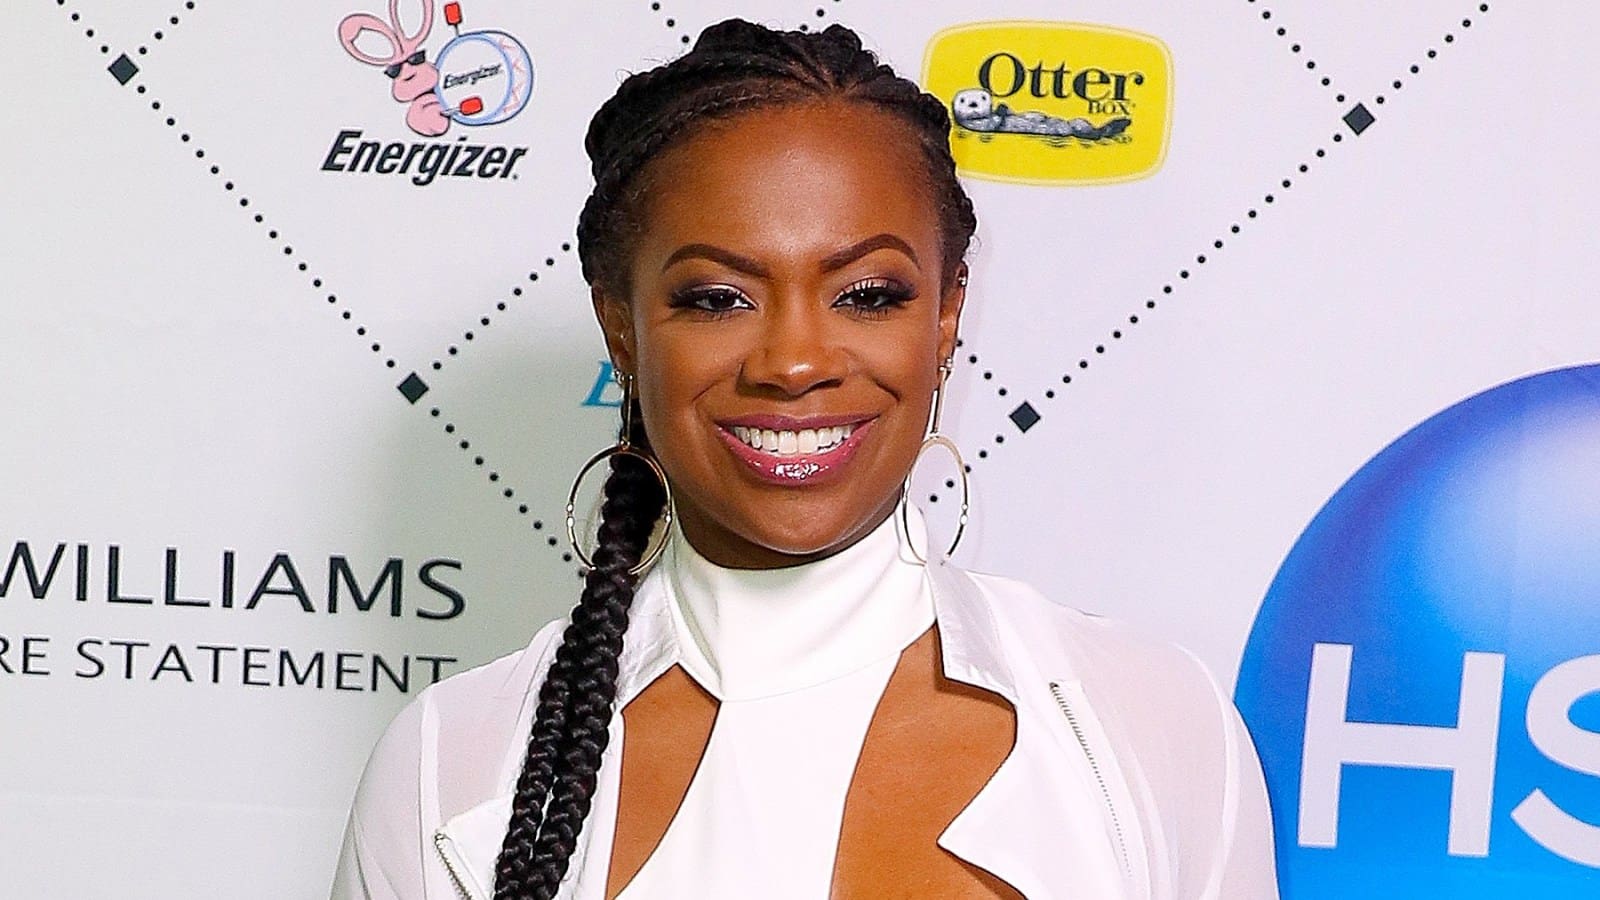 Kandi Burruss Presents Her New Guest For 'Speak On It' - Riley Burruss Is Staying In The Same Building With Her